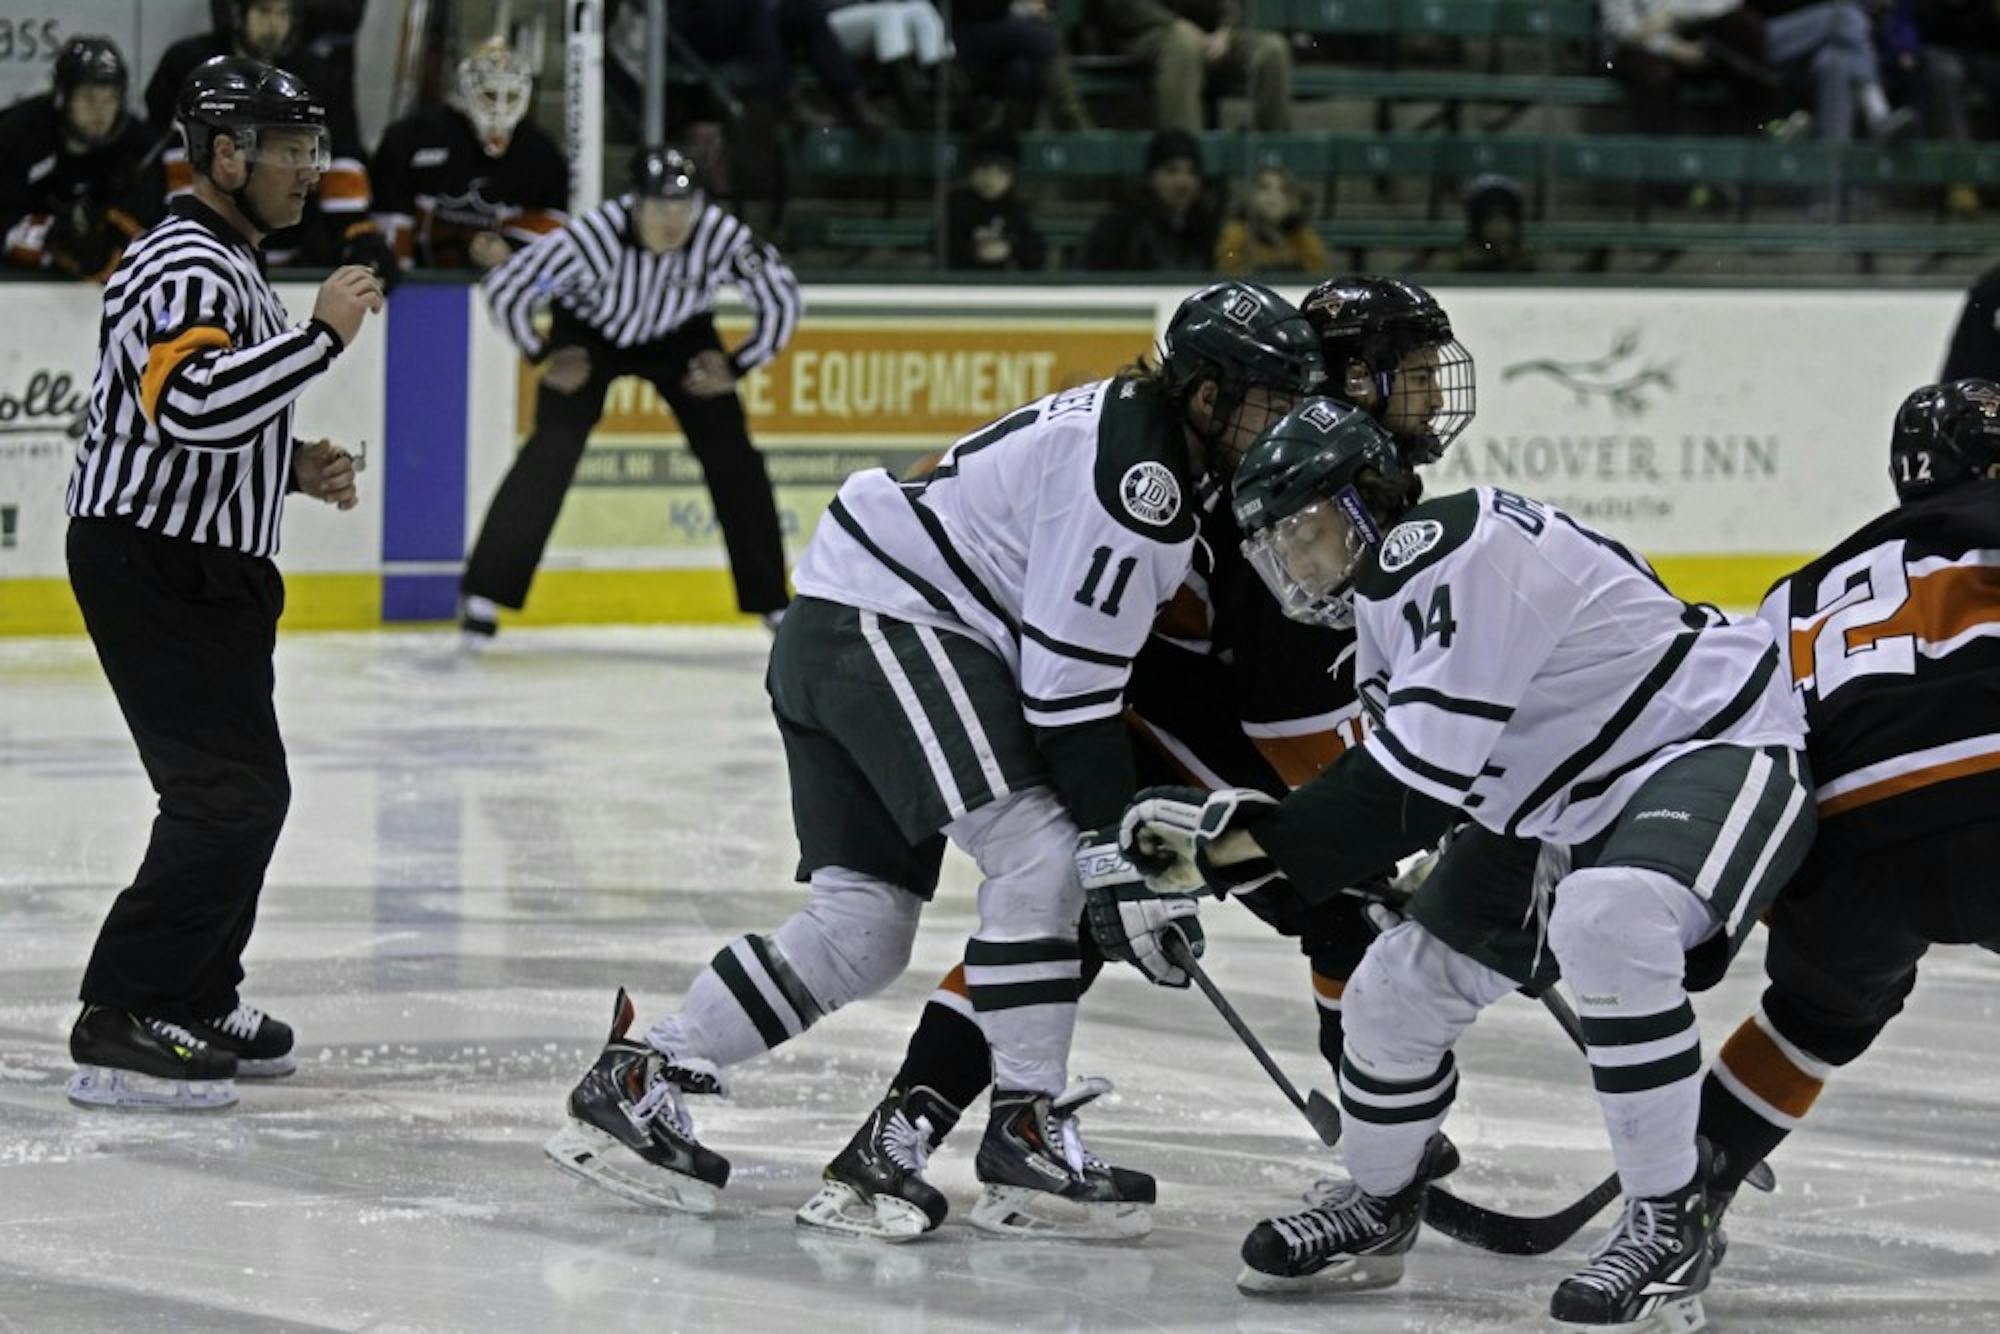 Eric Neiley '15 and Grant Opperman '17 battle for puck control in Thompson Arena.